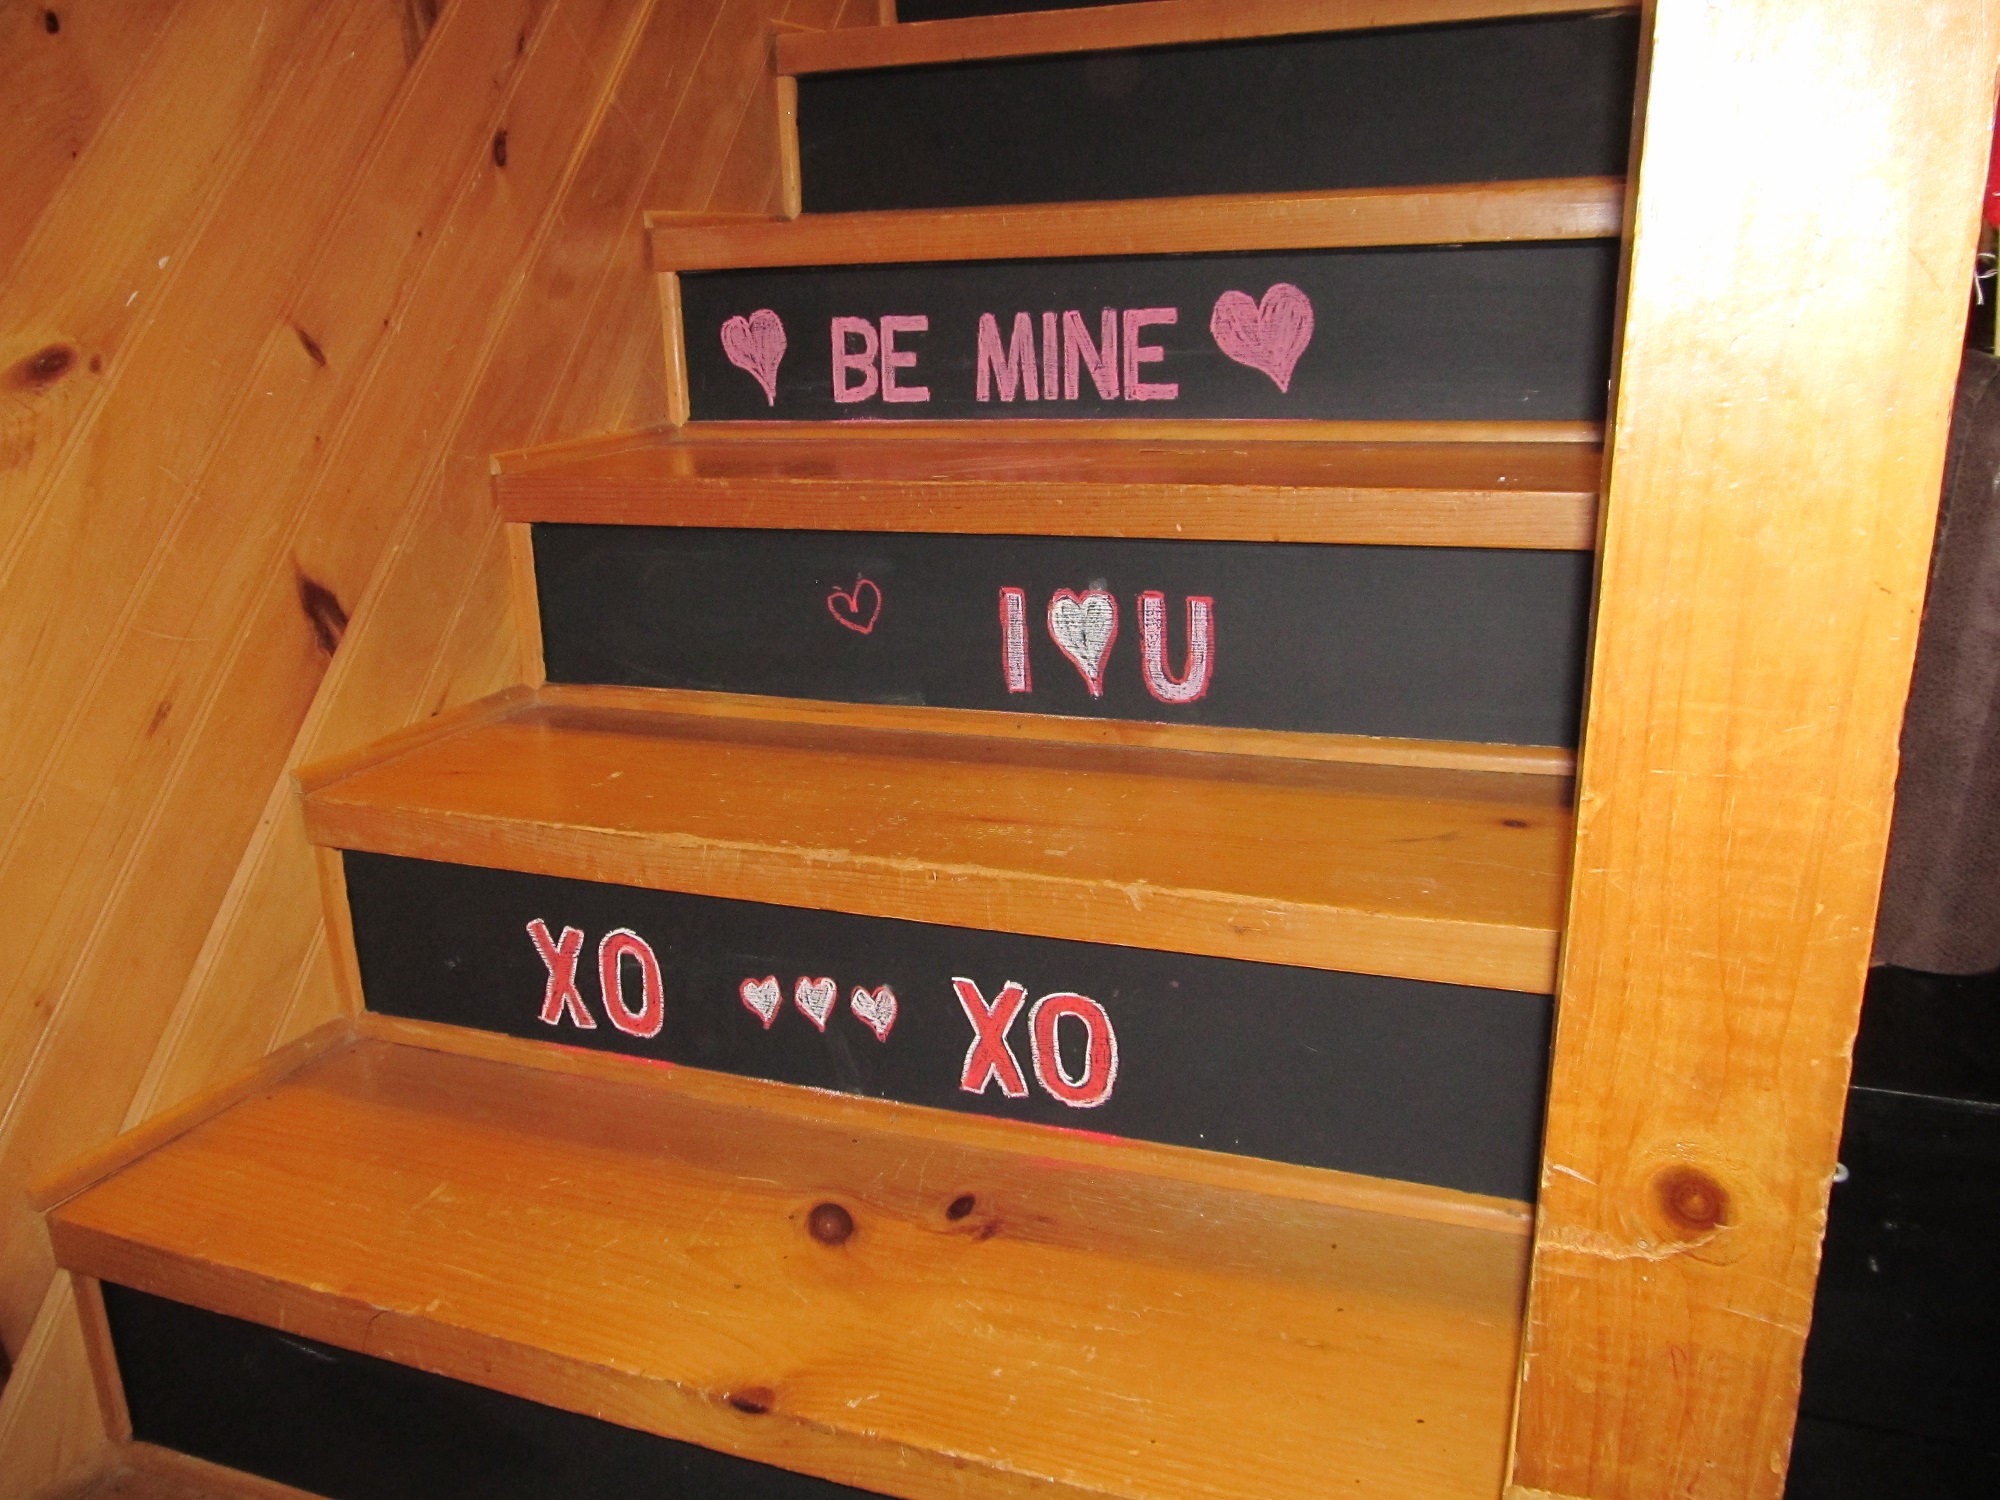 <!-- AddThis Share Buttons above via filter on get_the_excerpt -->
<div class="at-above-post-homepage" data-url="http://www.not2crafty.com/2014/01/fun-idea-stairway/" data-title="A fun idea for your stairway"></div>
 
I got bored with the stenciling I had done on my stairs and decided I could permanently solve that problem by using chalkboard paint. This will enable me to [...]<!-- AddThis Share Buttons below via filter on get_the_excerpt -->
<div class="at-below-post-homepage" data-url="http://www.not2crafty.com/2014/01/fun-idea-stairway/" data-title="A fun idea for your stairway"></div><!-- AddThis Share Buttons generic via filter on get_the_excerpt -->
<!-- AddThis Related Posts generic via filter on get_the_excerpt -->
